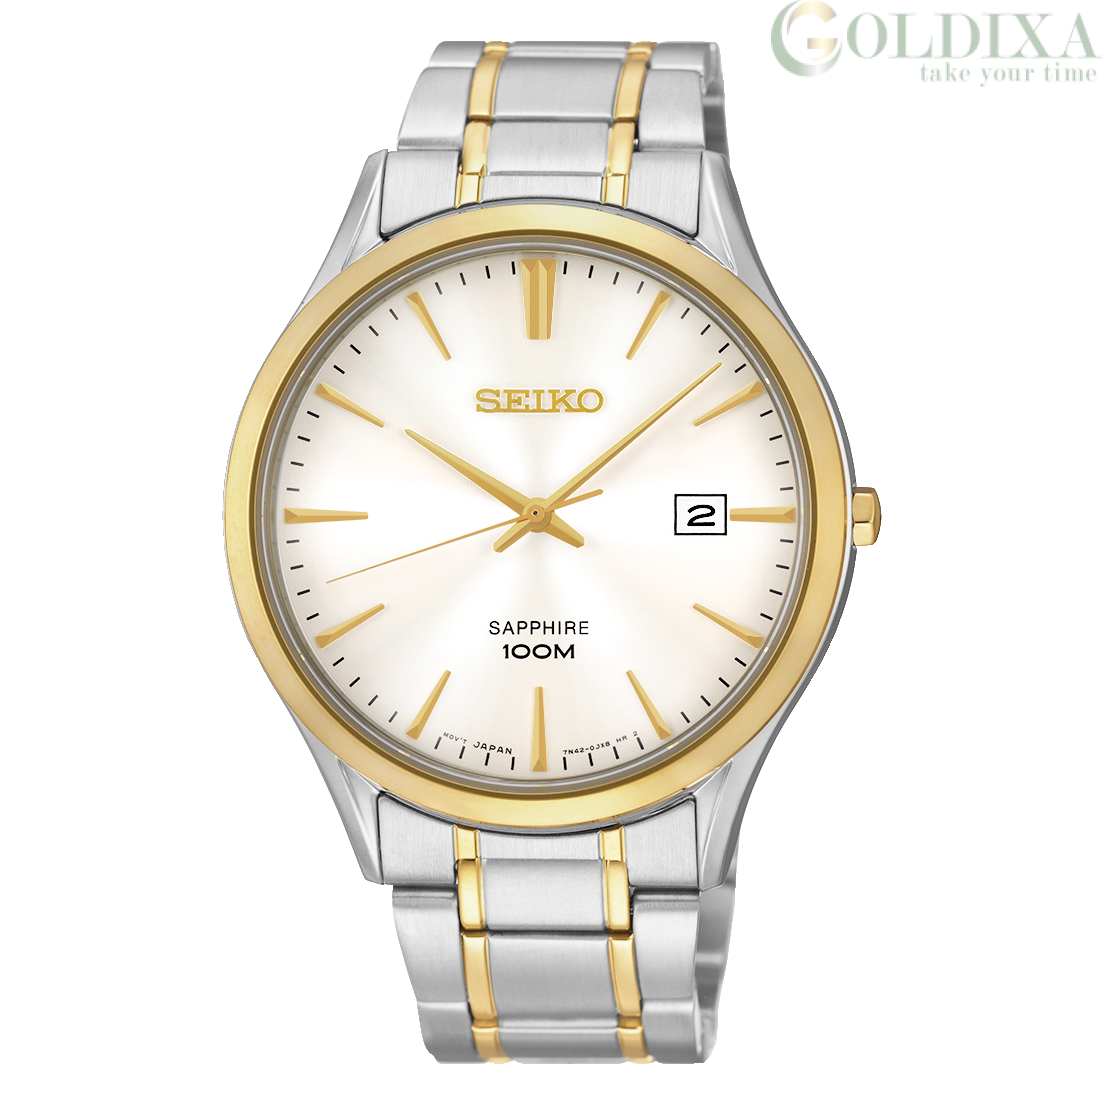 Watches: Watch Seiko SGEG96P1 only time Sapphire 100M